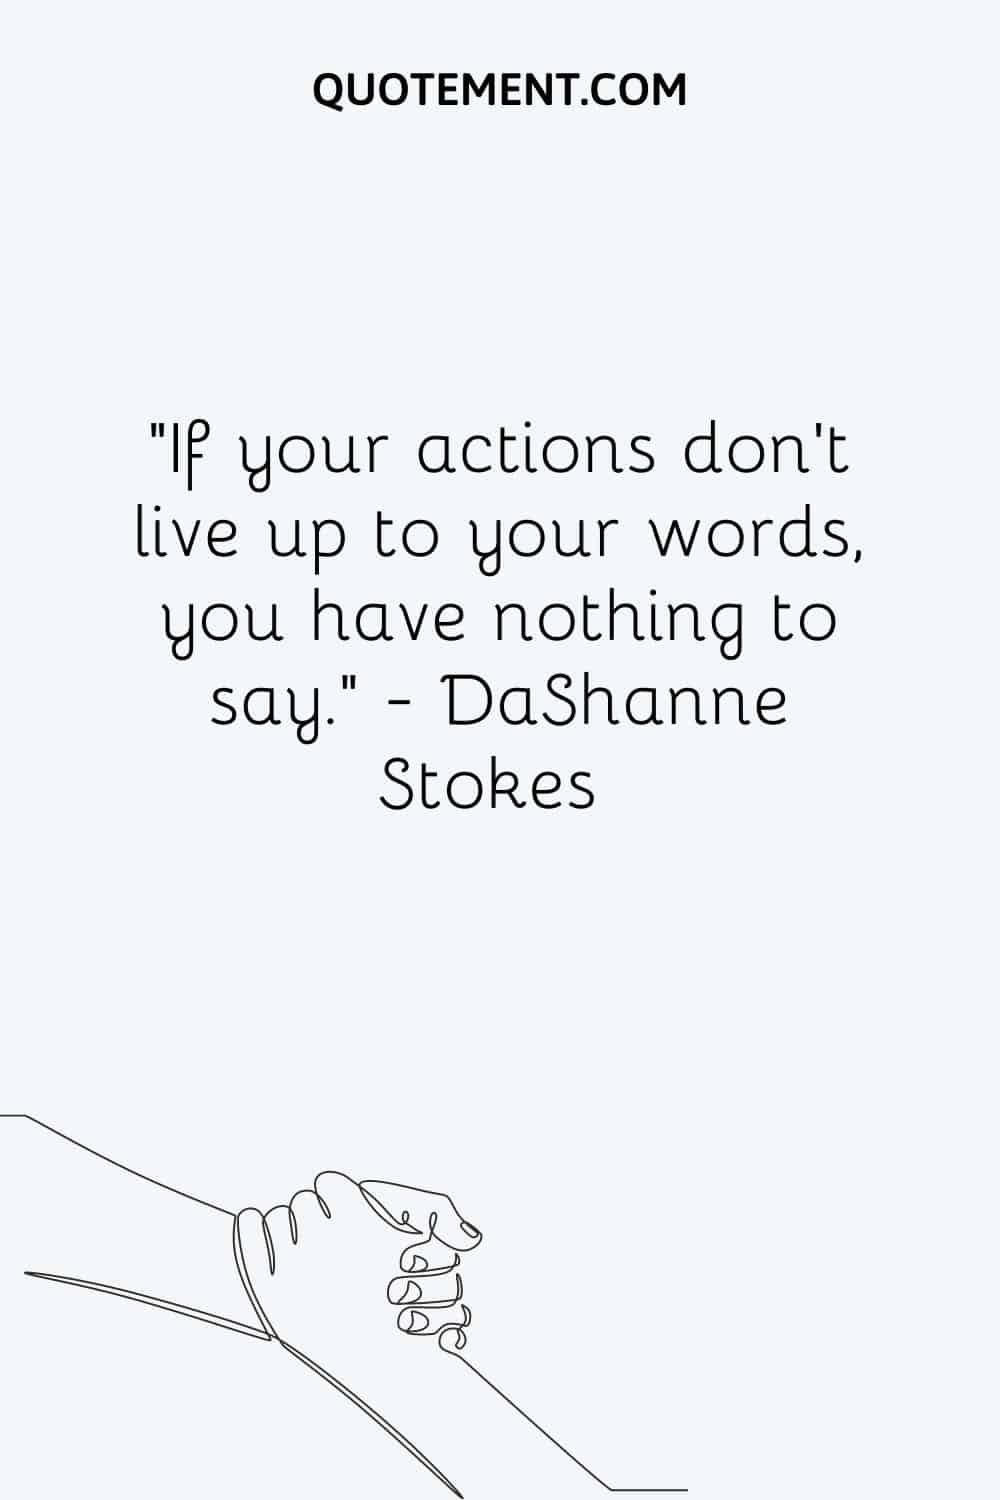 If your actions don’t live up to your words, you have nothing to say